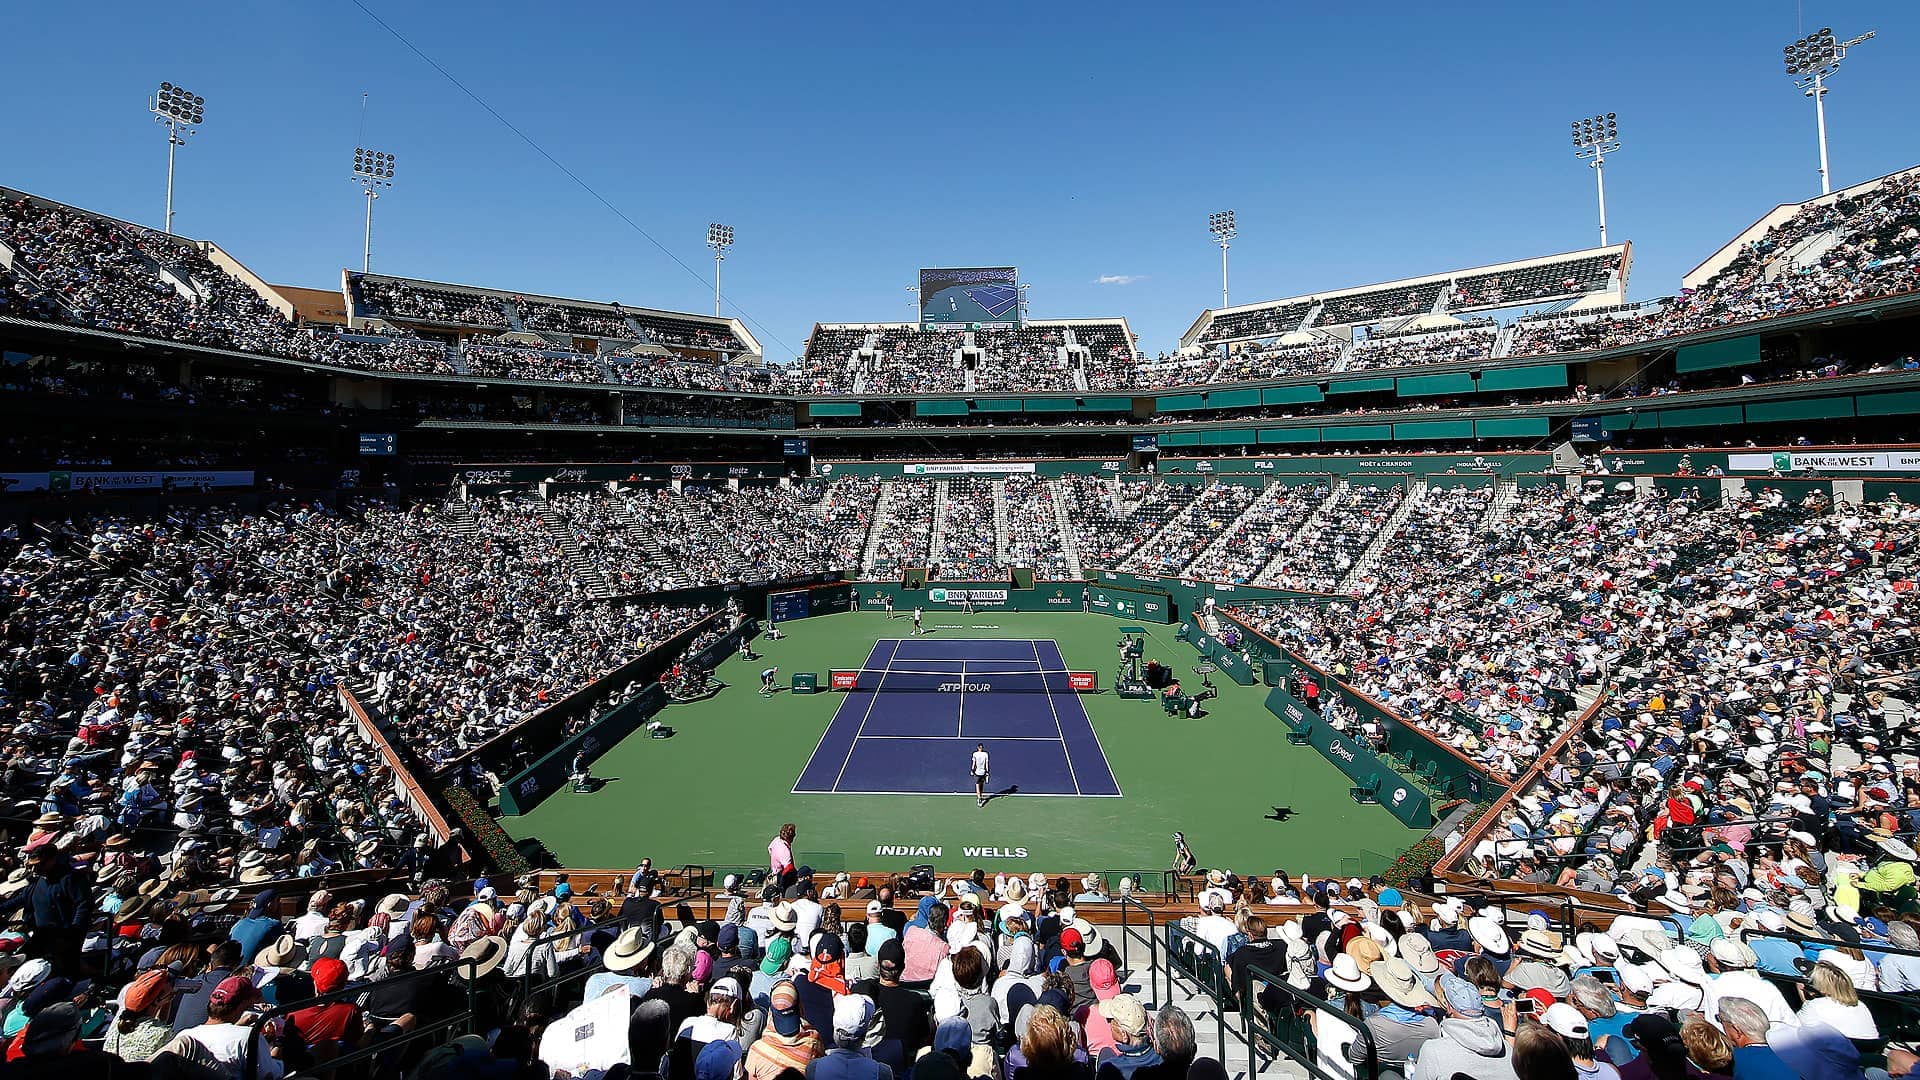 A wide angle view of Stadium 1, the main show court of the BNP Paribas Open at the Indian Wells Tennis Garden.